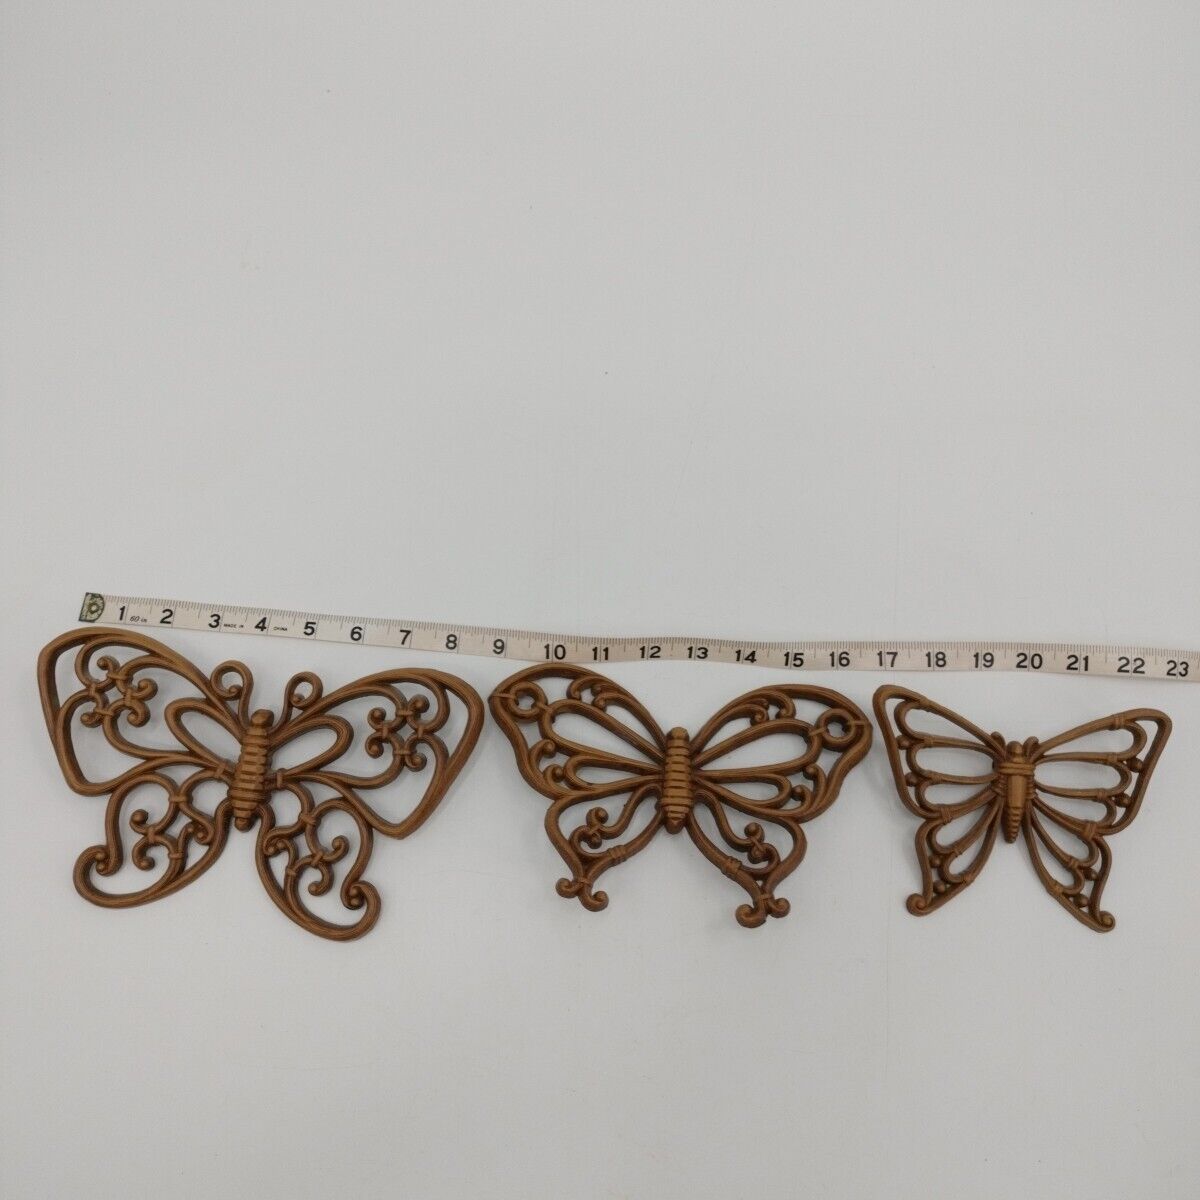 Vintage Homco Syroco Butterfly Wall Hanging Decor 70s BoHo Retro Made In USA. 